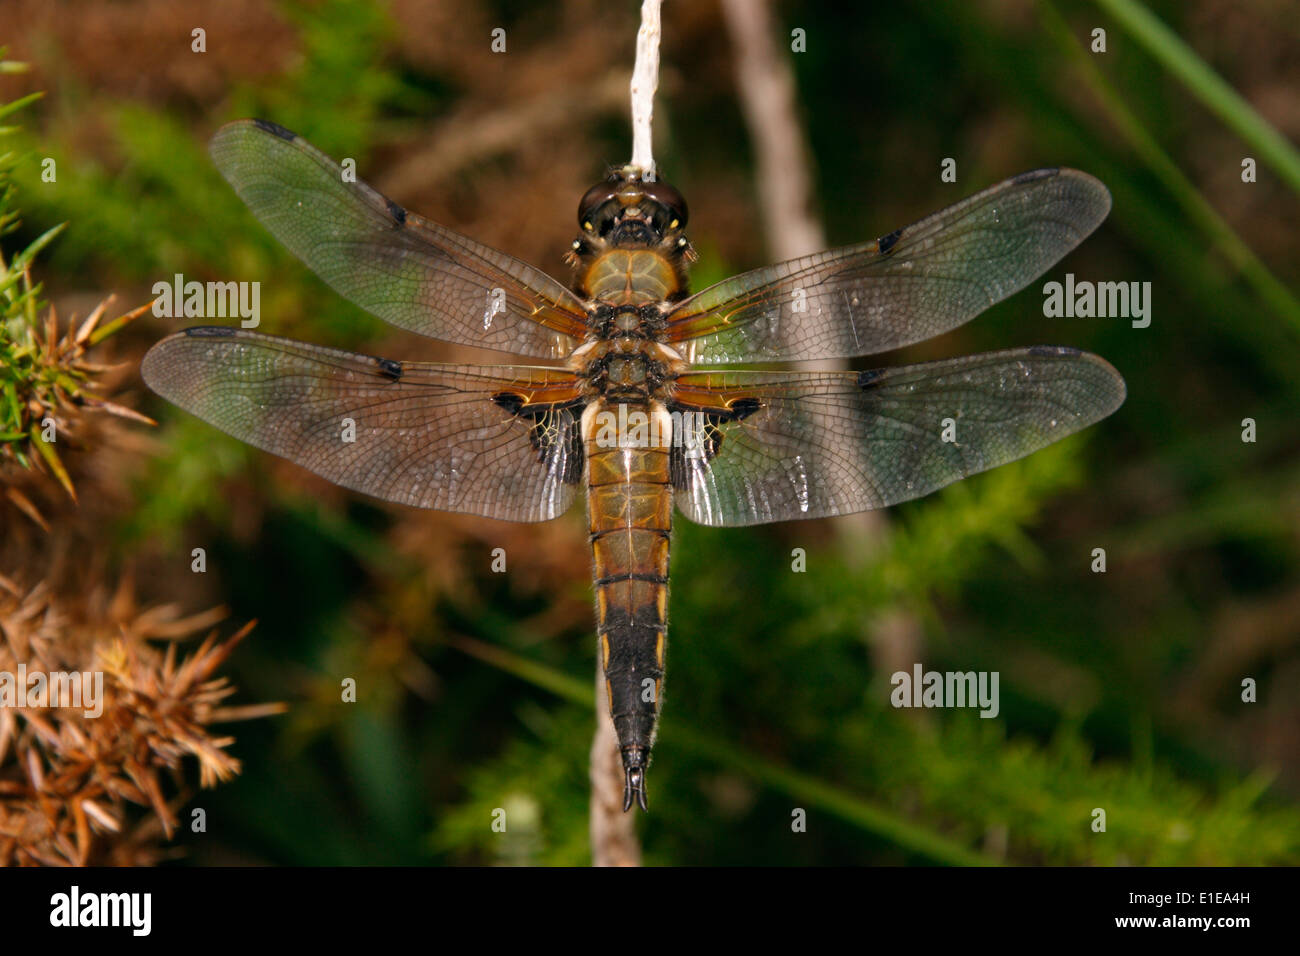 Quattro-spotted chaser dragonfly (Libellula quadrimaculata), UK. Foto Stock